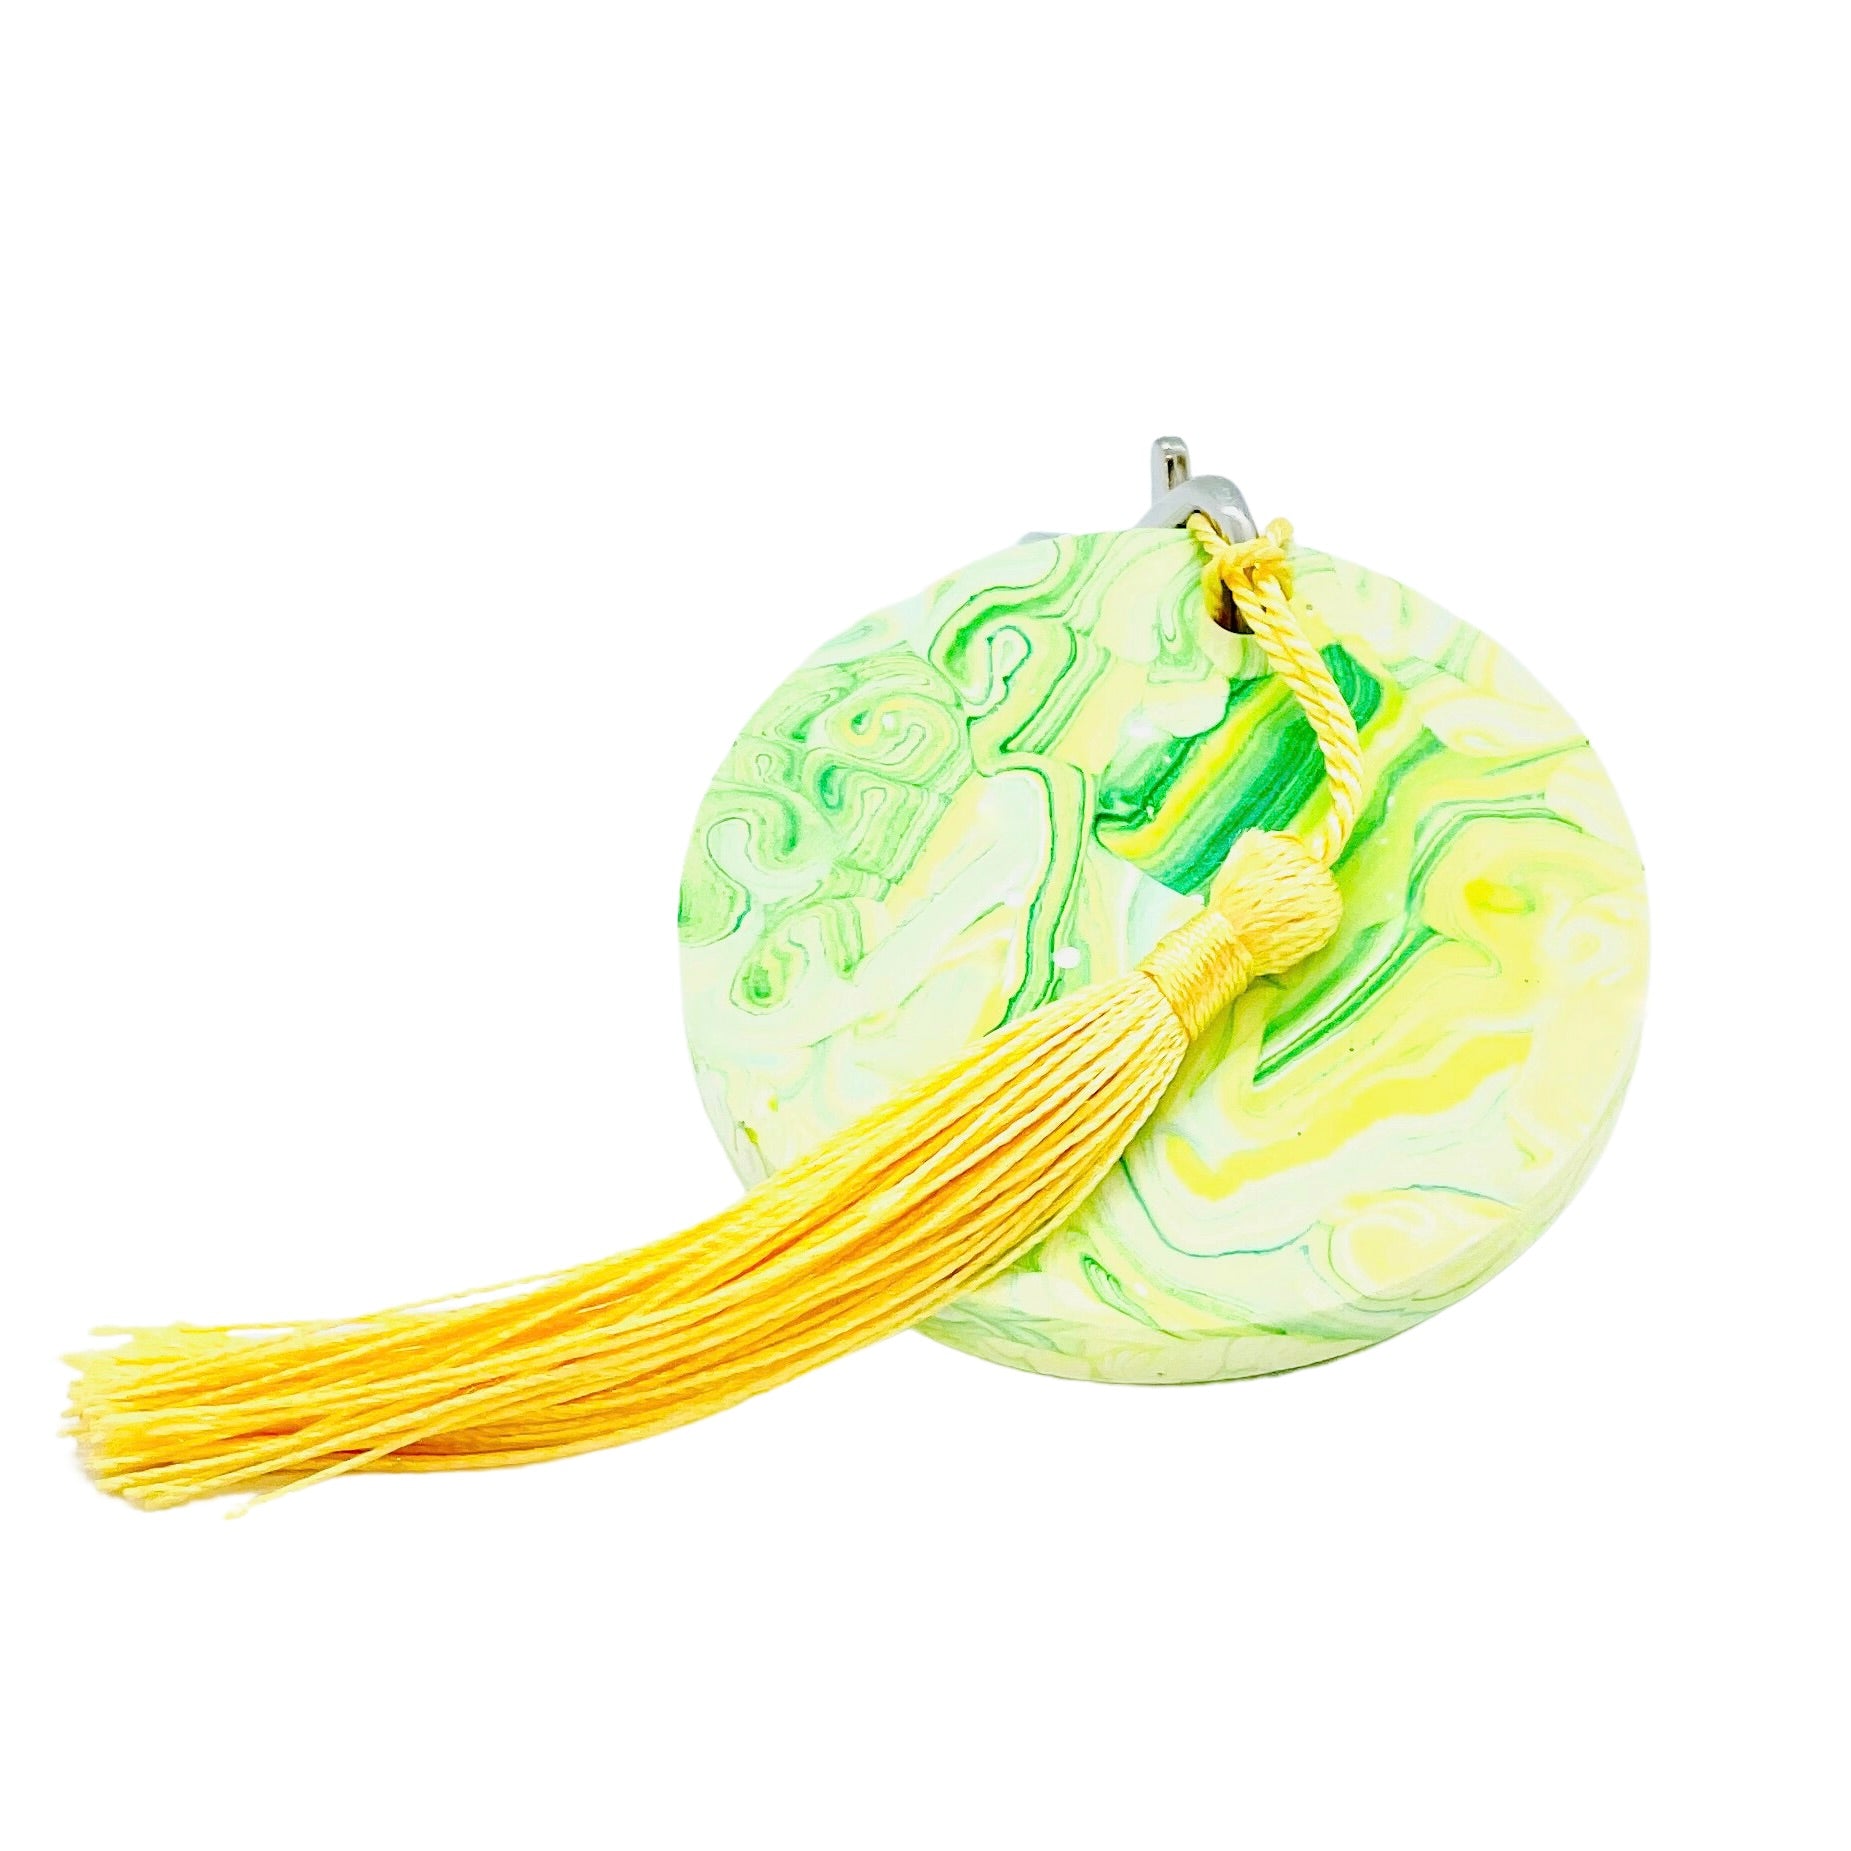 A round Jesmonite disc keyring measuring 6cm in diameter marbled with green and yellow pigment.